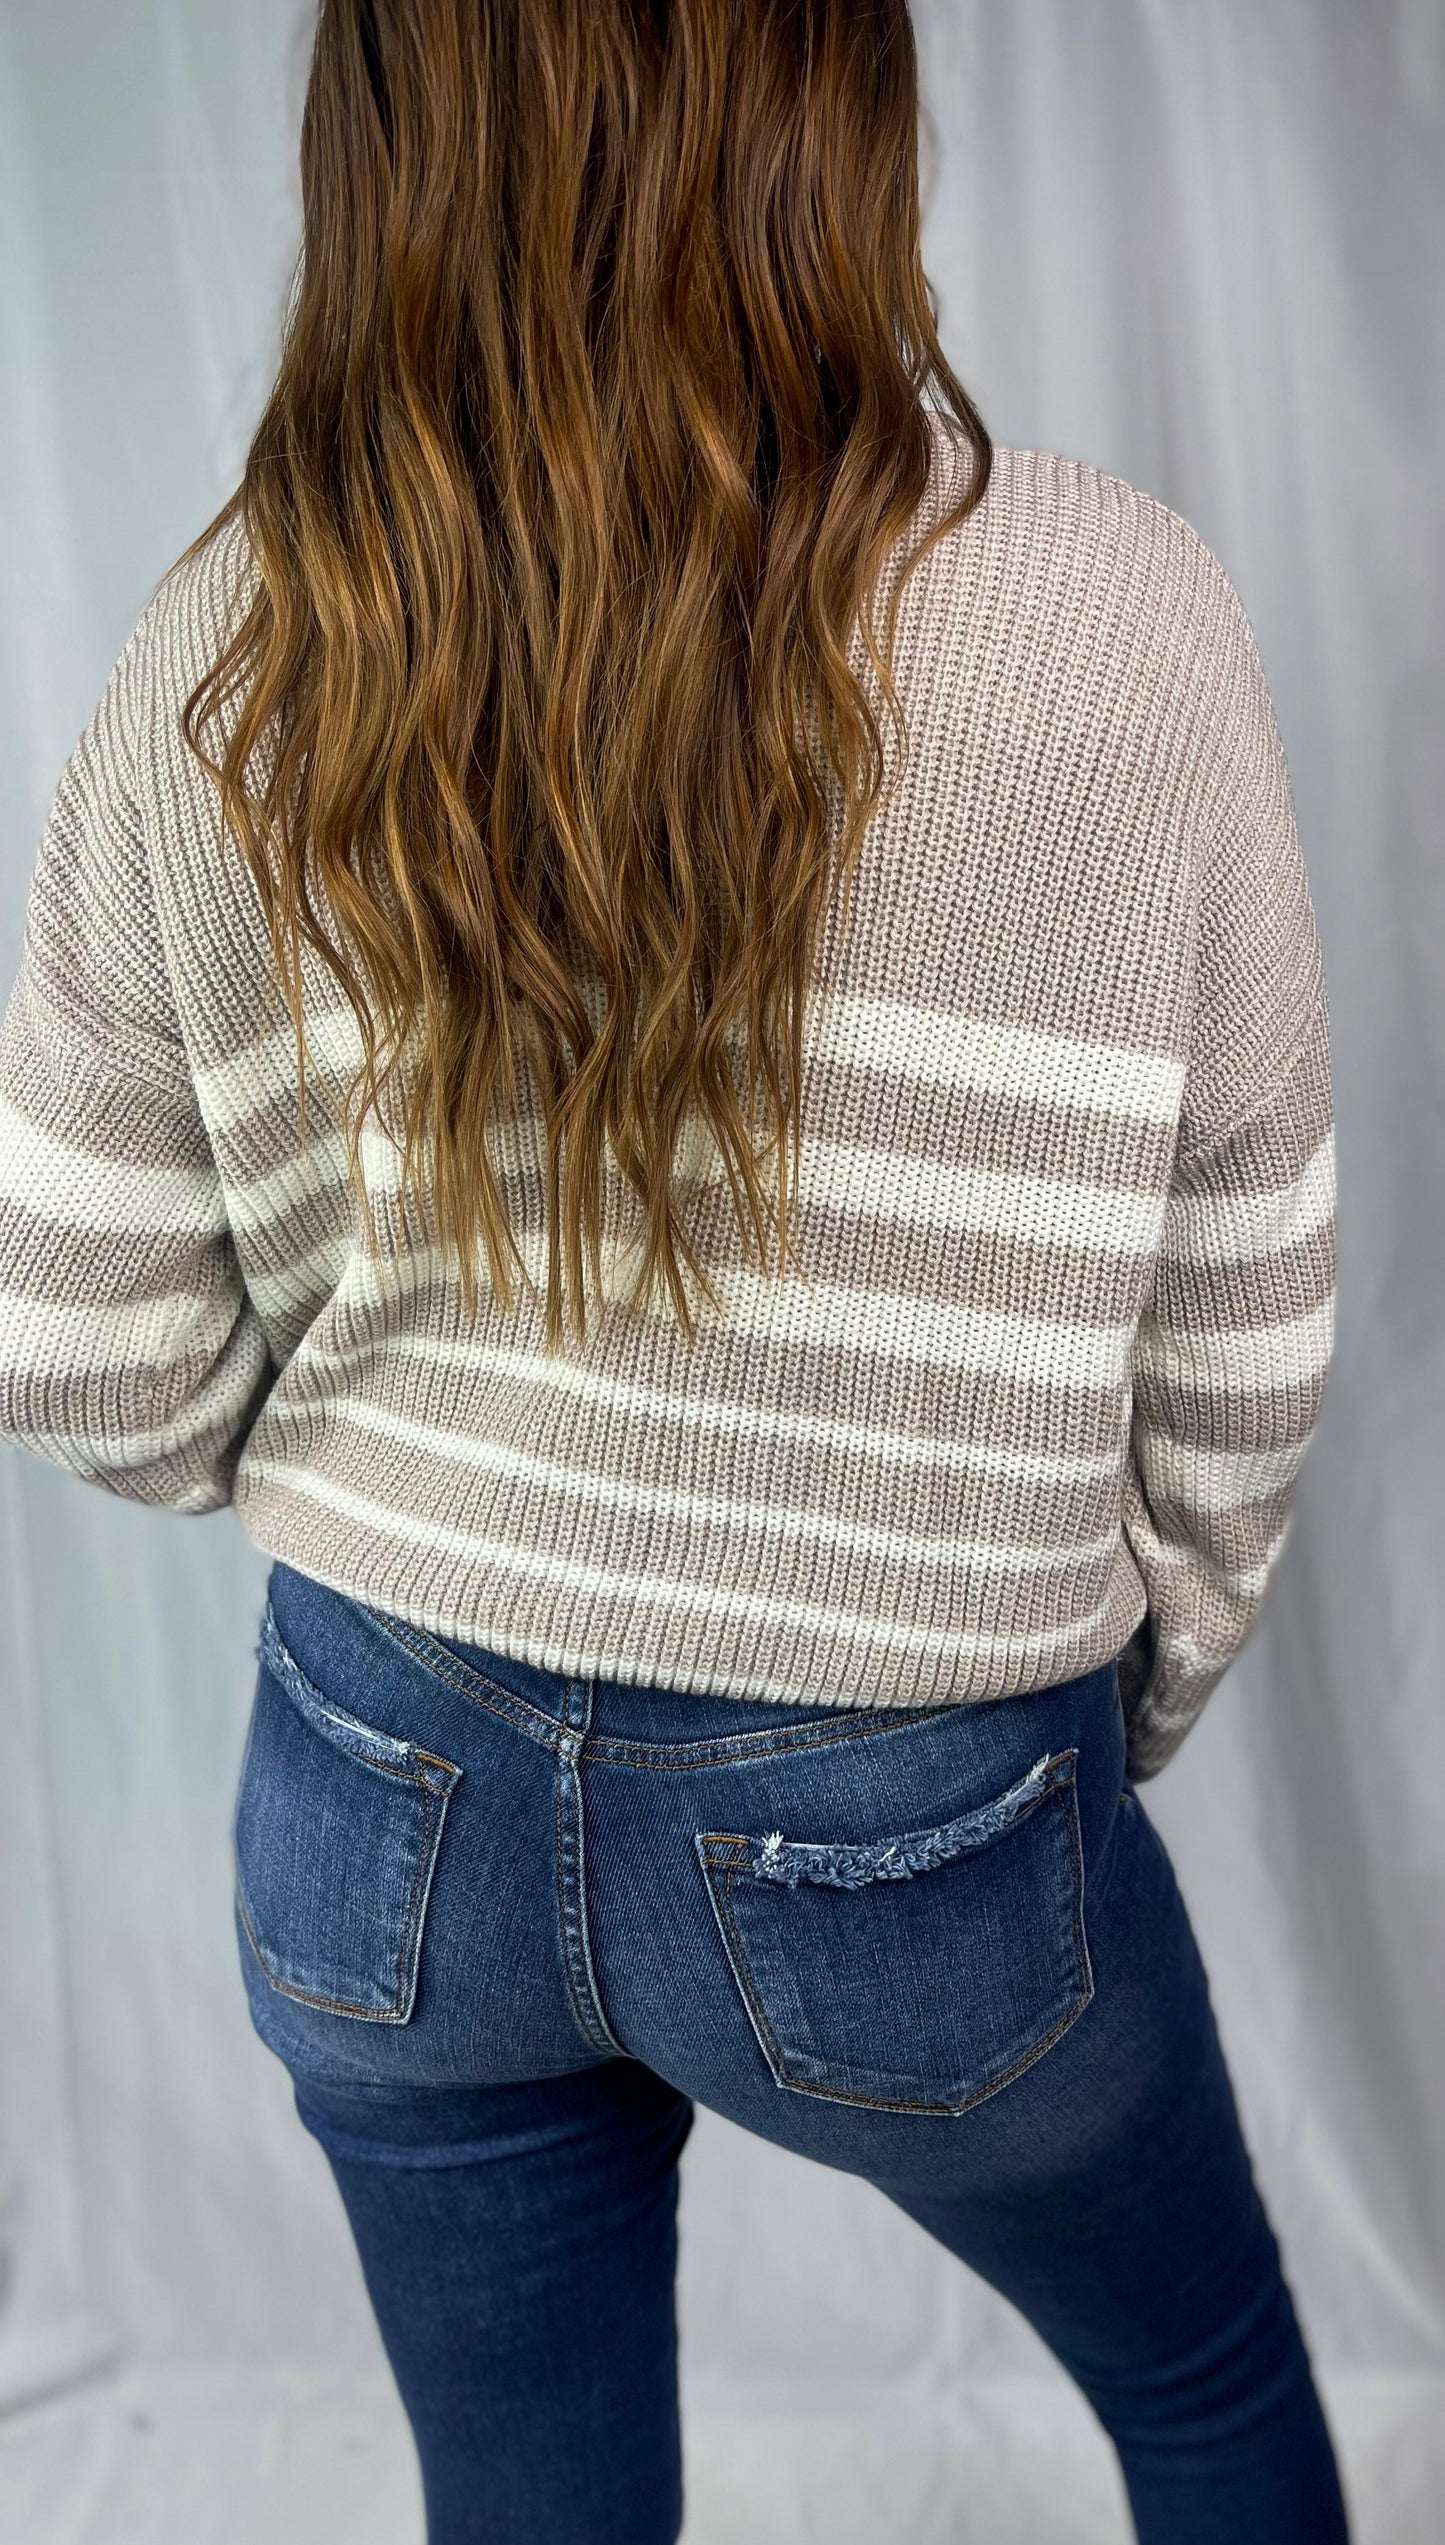 Morning Bliss Taupe & Ivory Striped Sweater